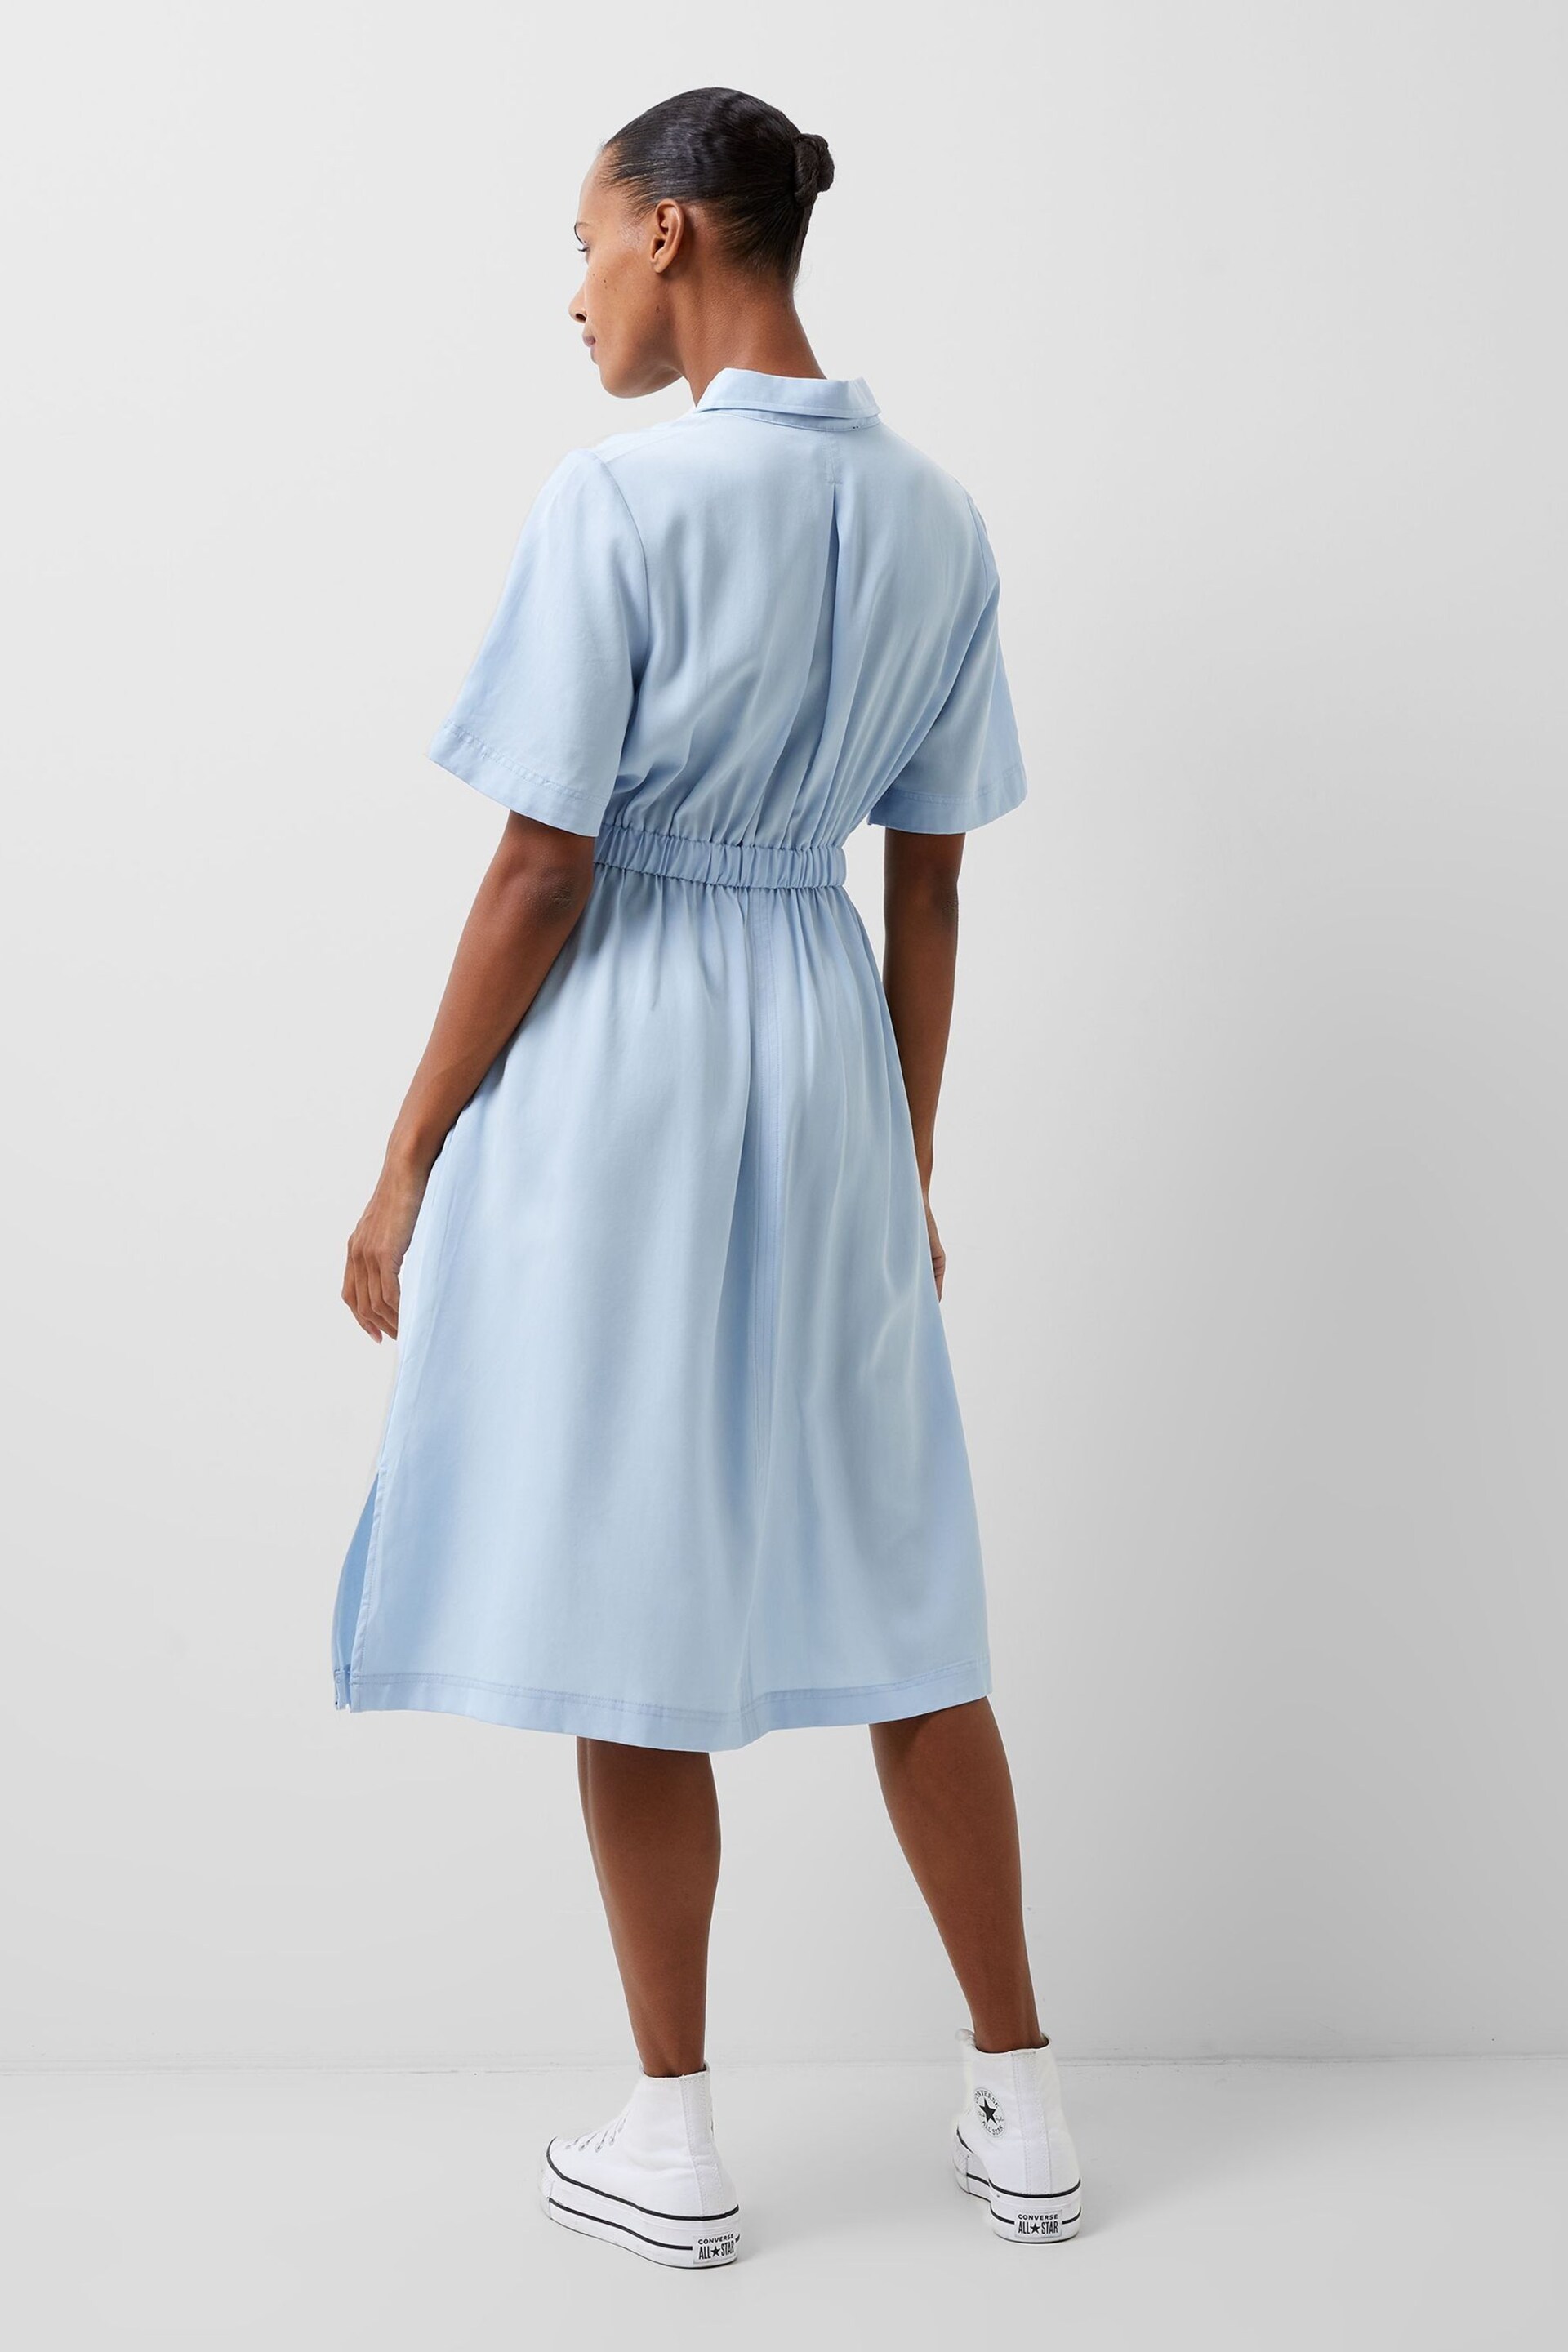 French Connection Arielle Shirt Dress - Image 2 of 4